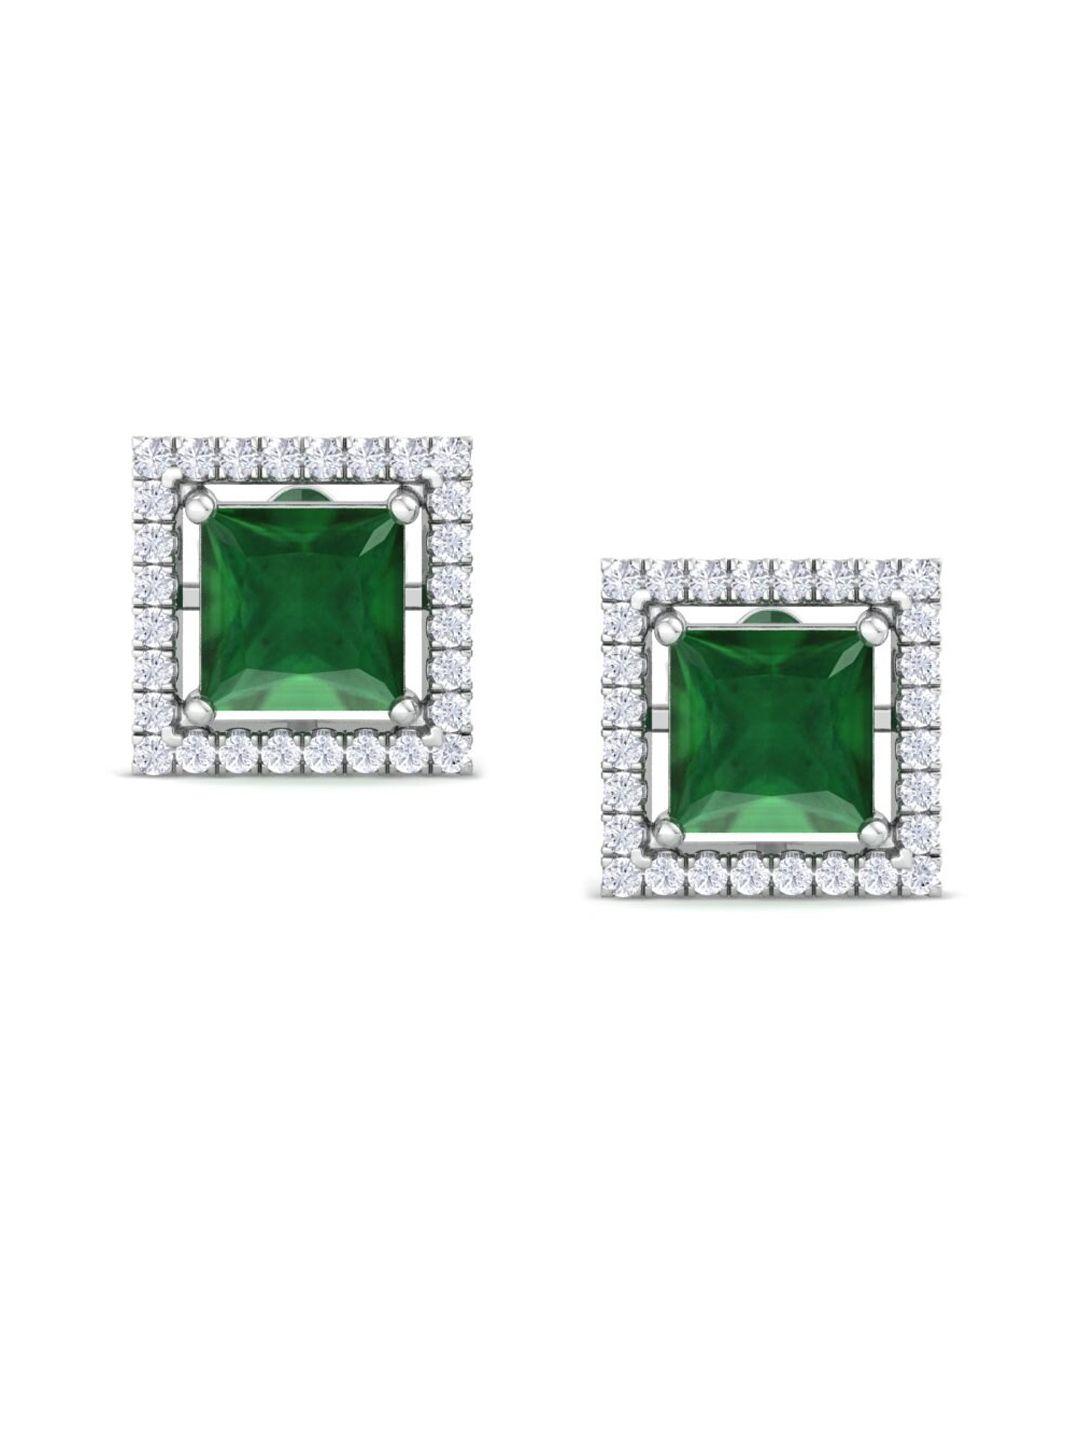 inddus jewels 925 sterling silver rhodium-plated square studs earrings